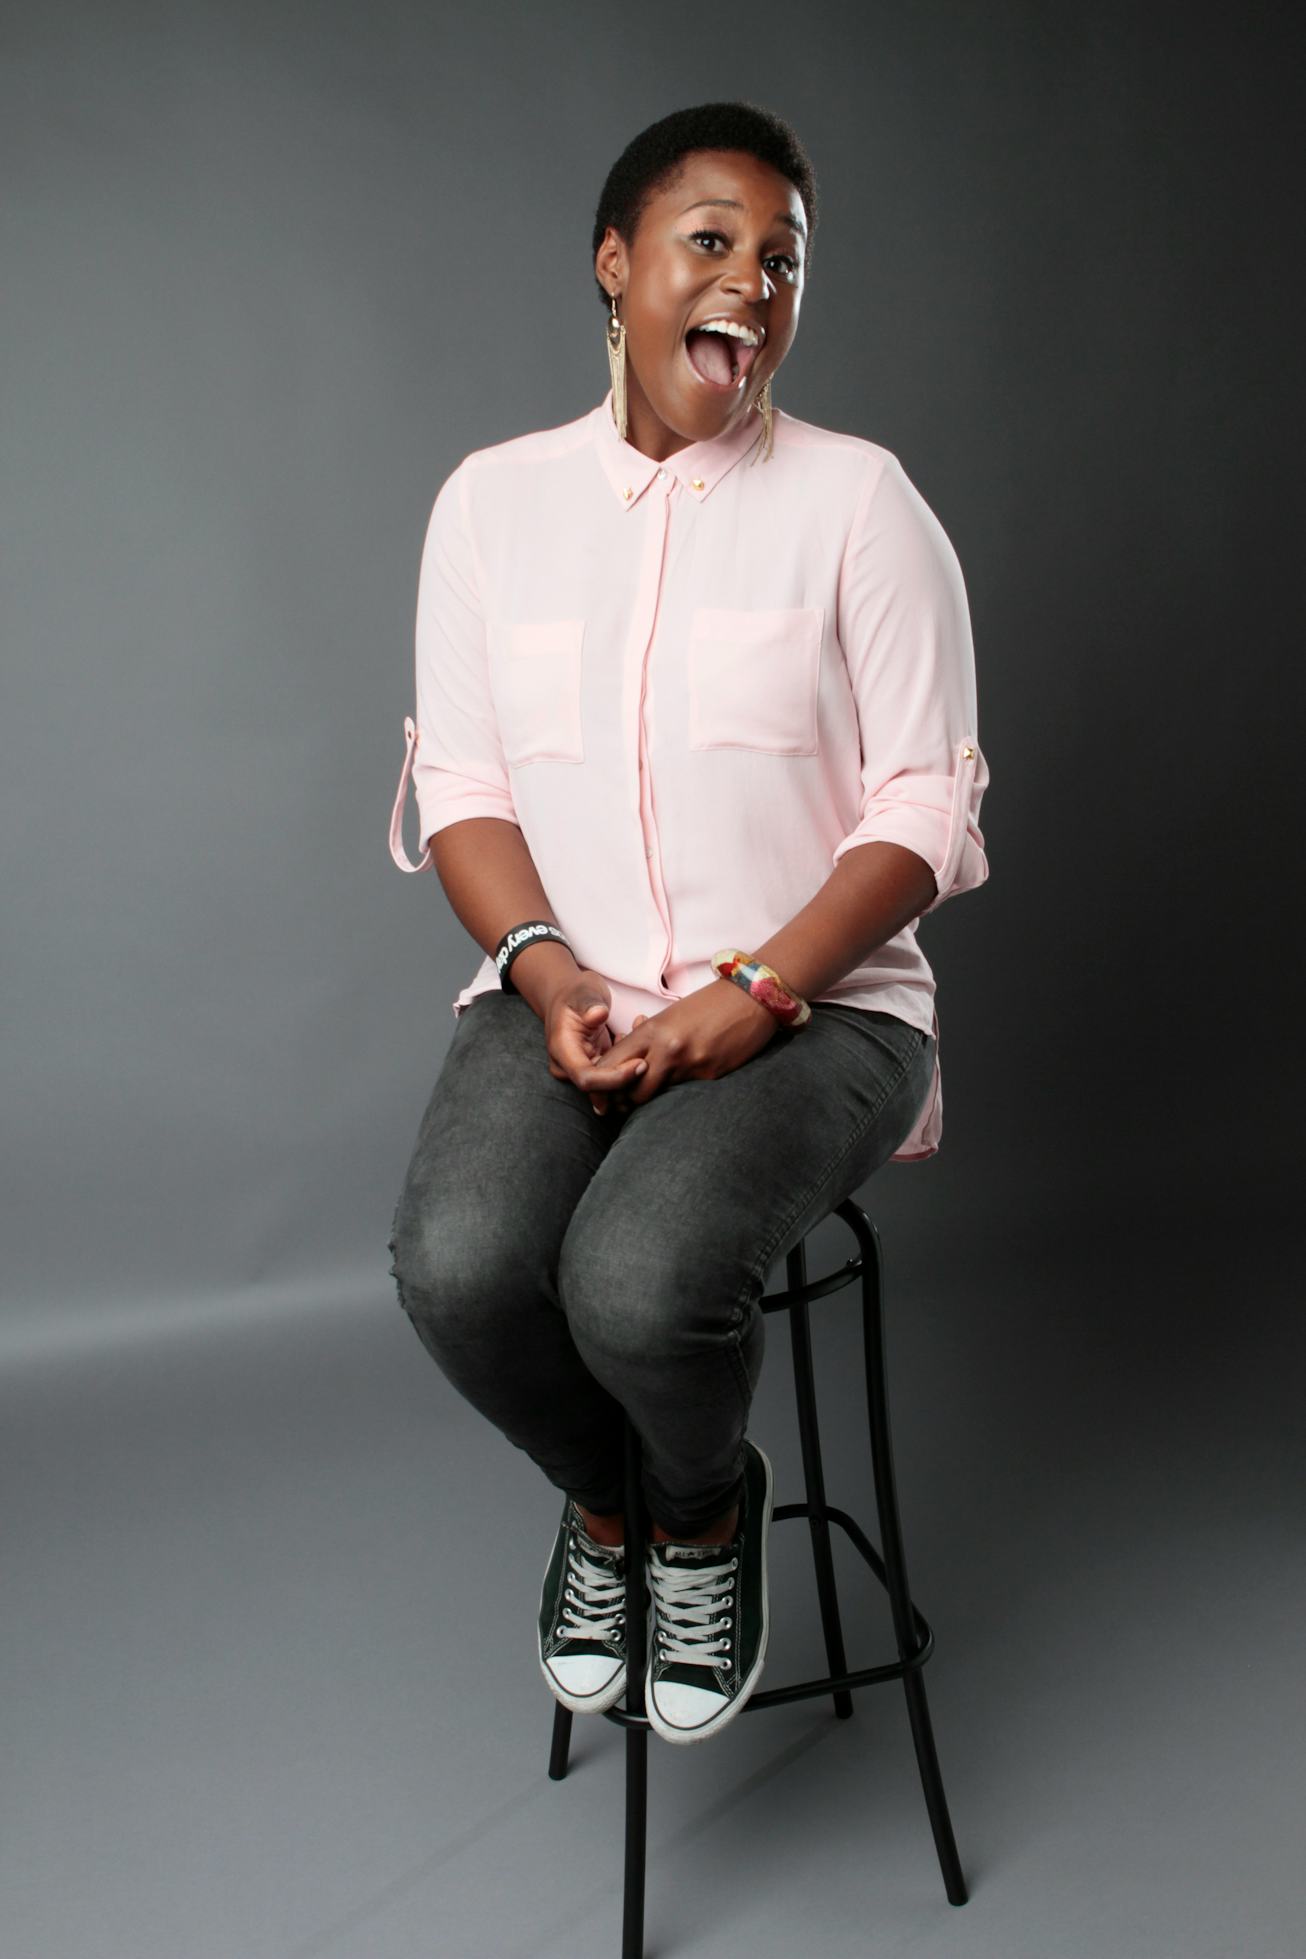 Issa Rae in a light pink button down shirt on a stool in a studio. 